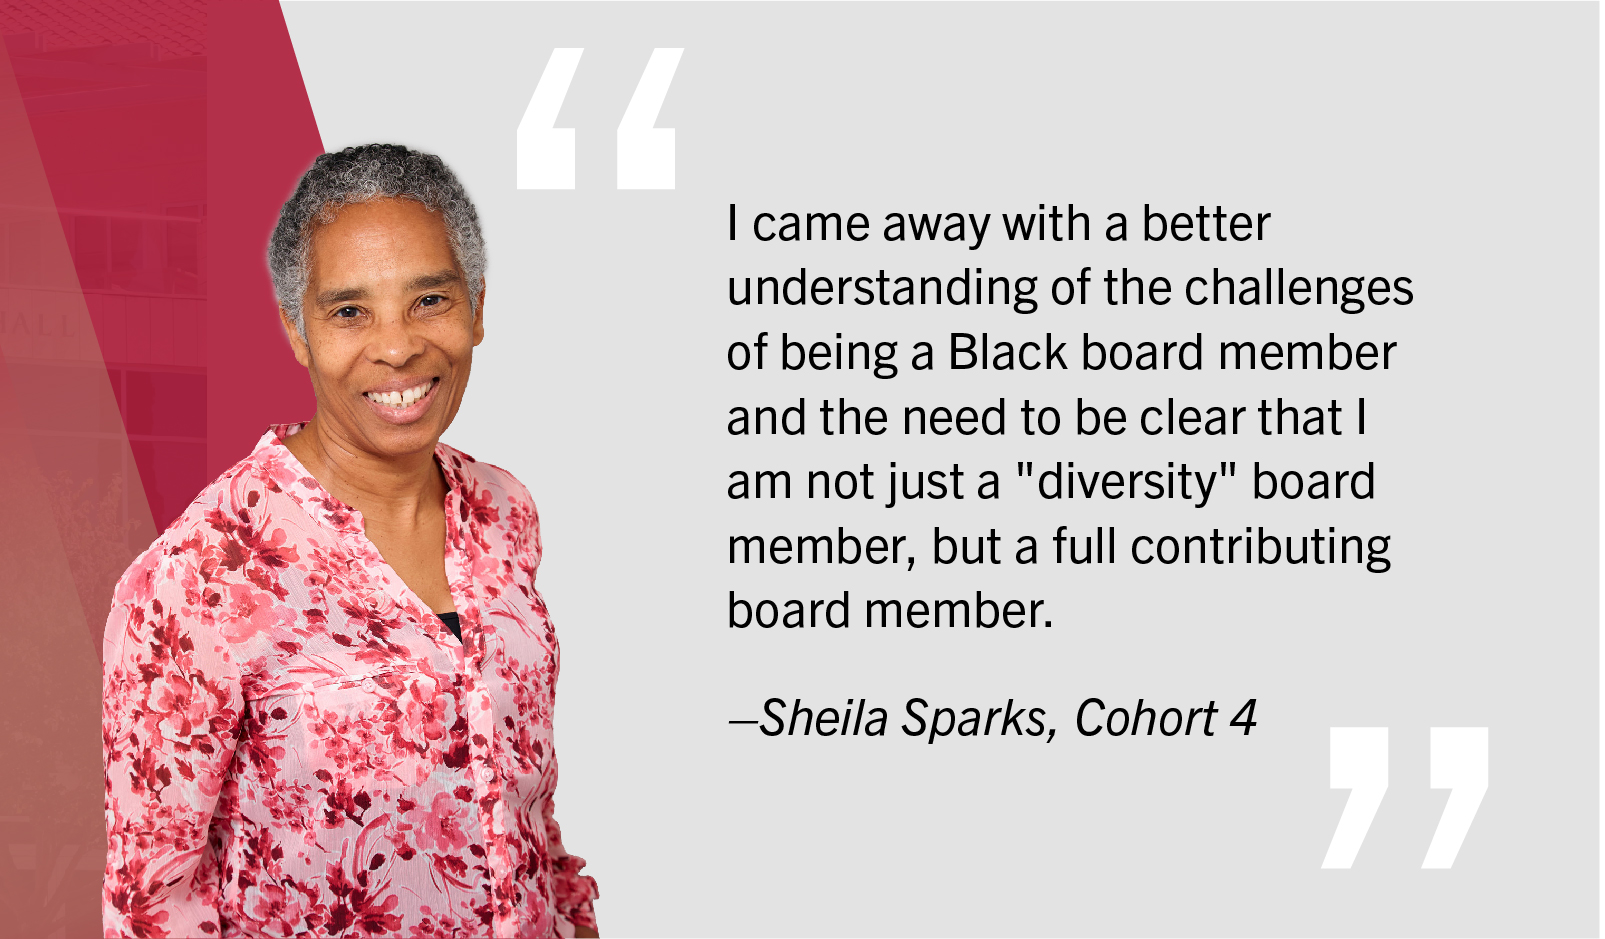 Quote by Sheila Sparks, Cohort 4